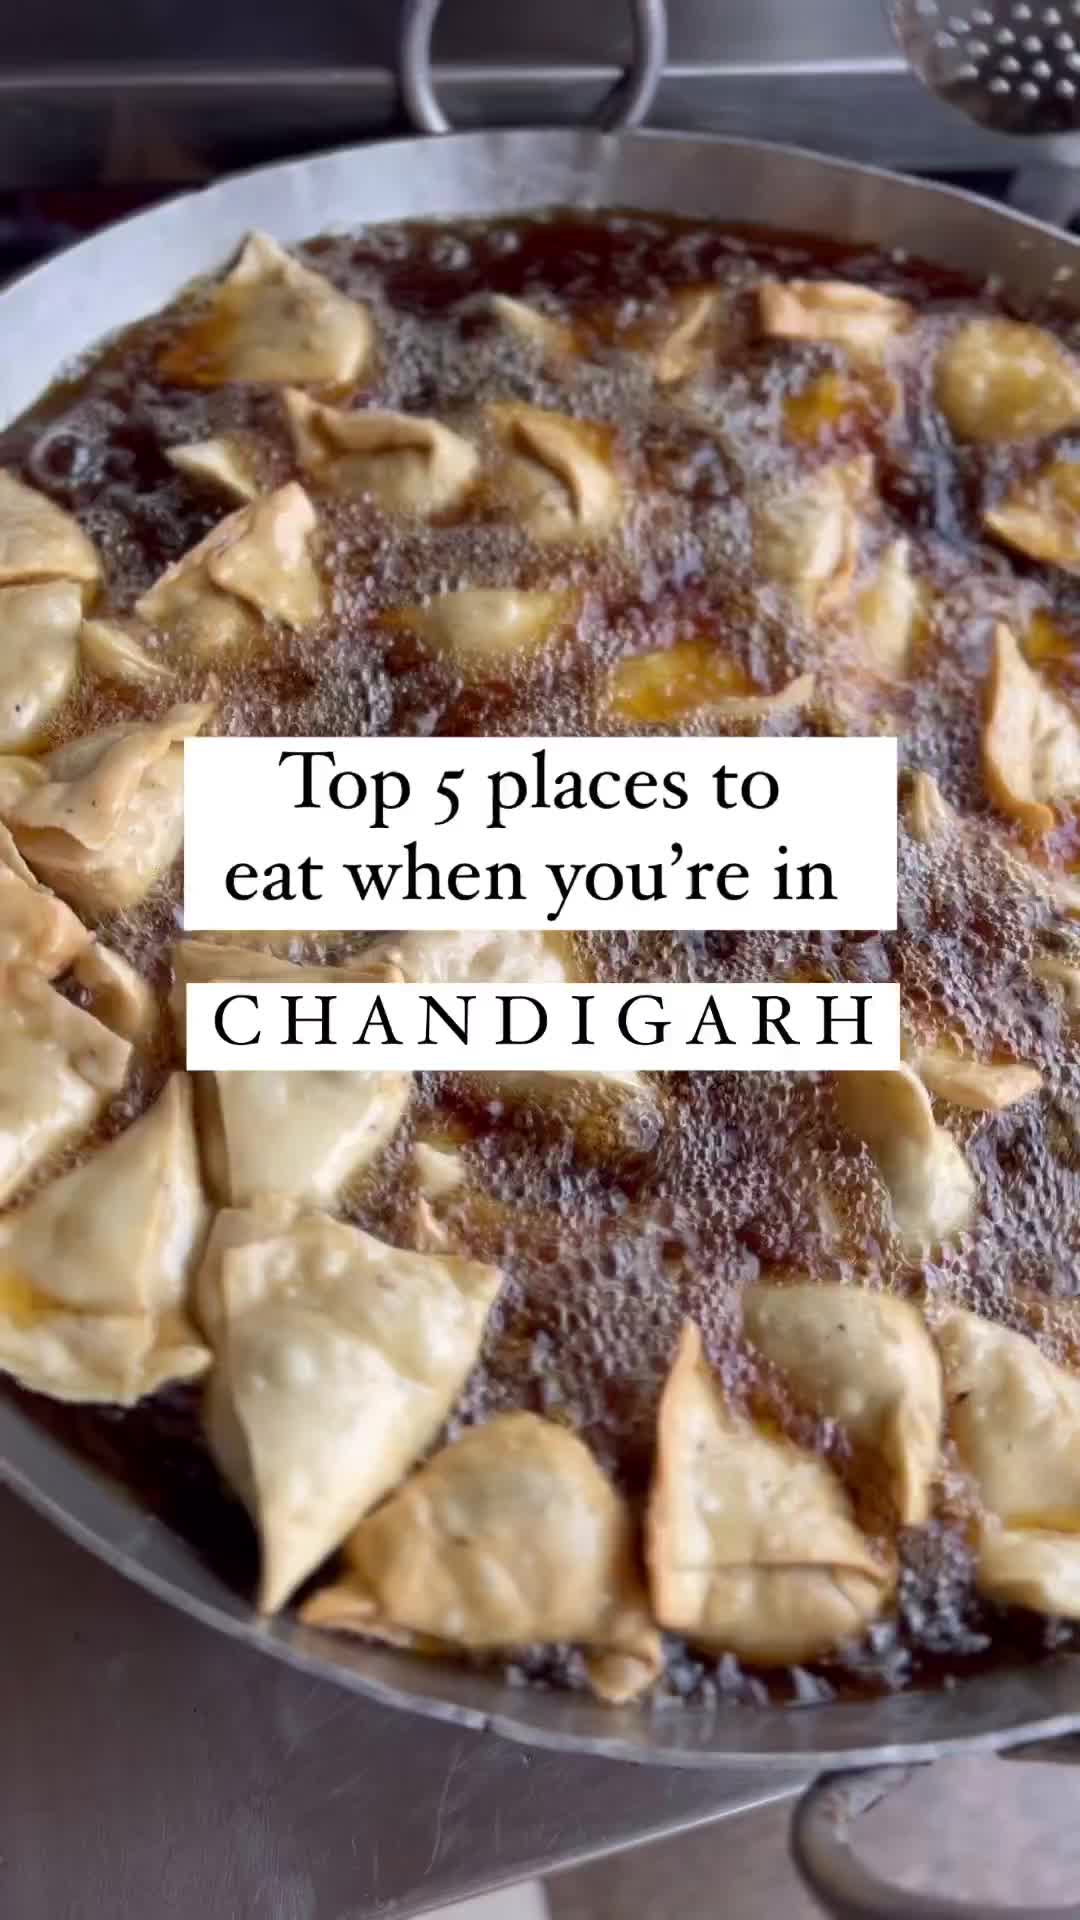 Top 5 Must-Visit Food Spots in Chandigarh